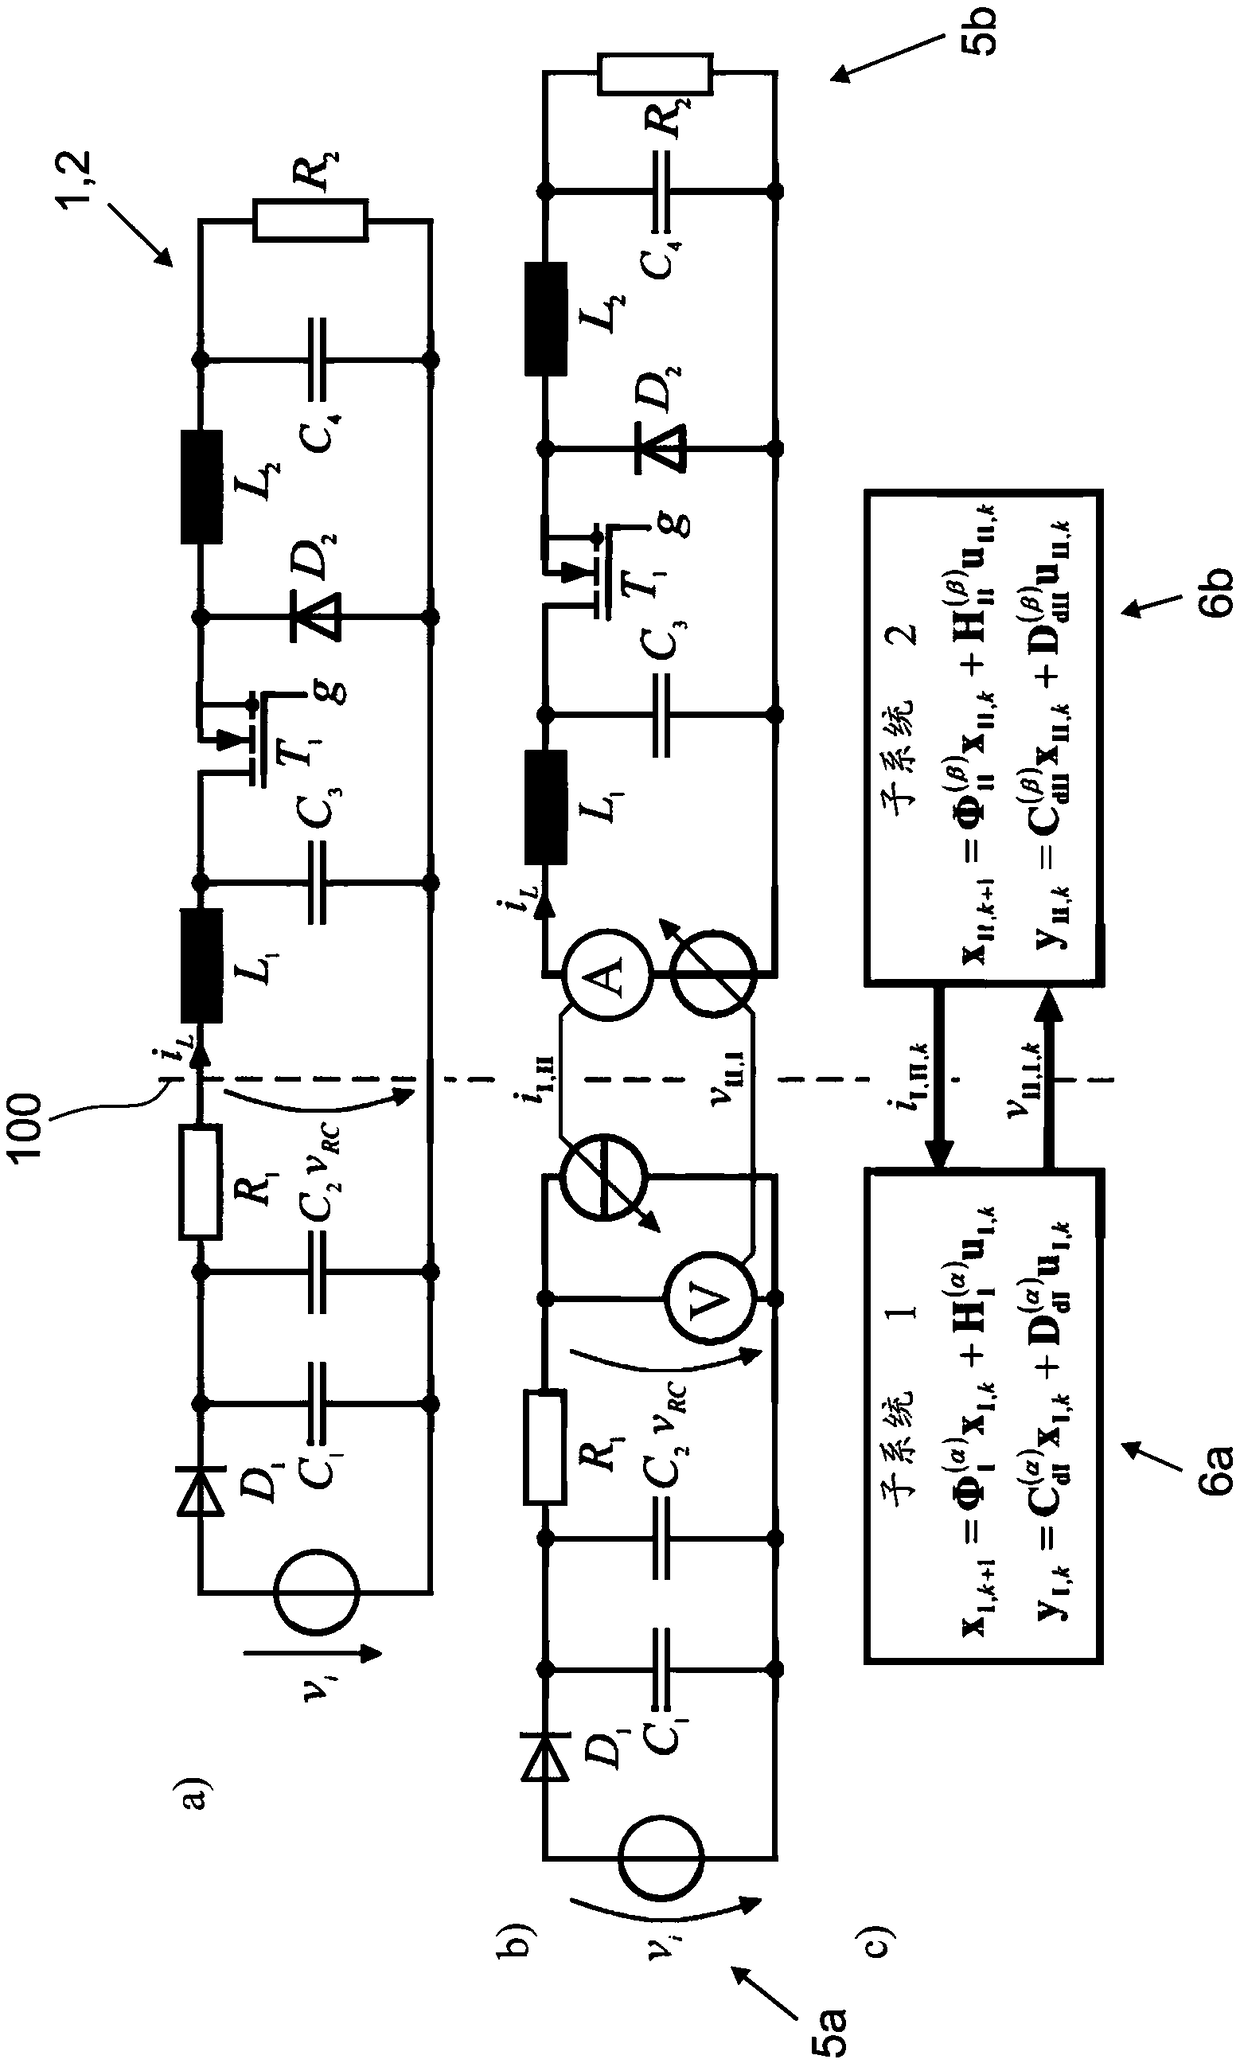 Computer-implemented method for simulation of entire electronic circuit